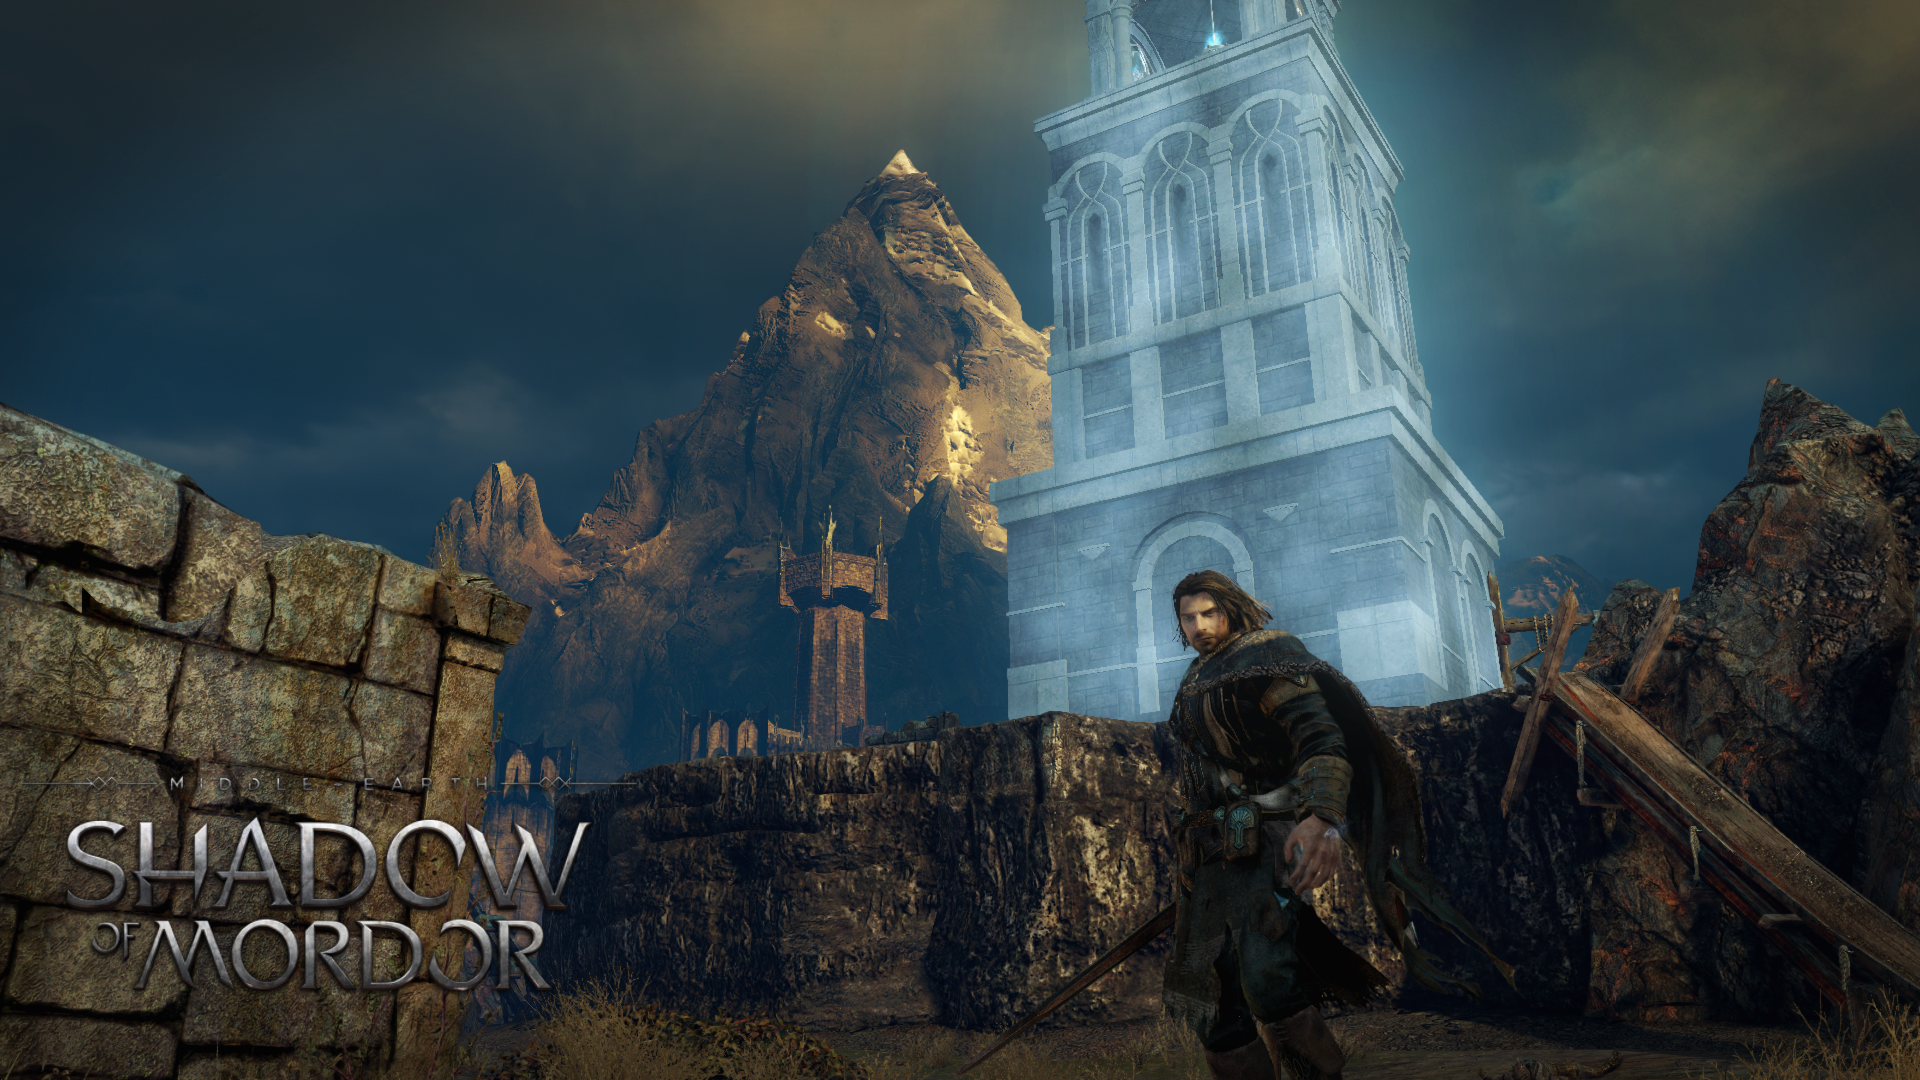 General 1920x1080 video games Middle-earth: Shadow of Mordor screen shot PC gaming